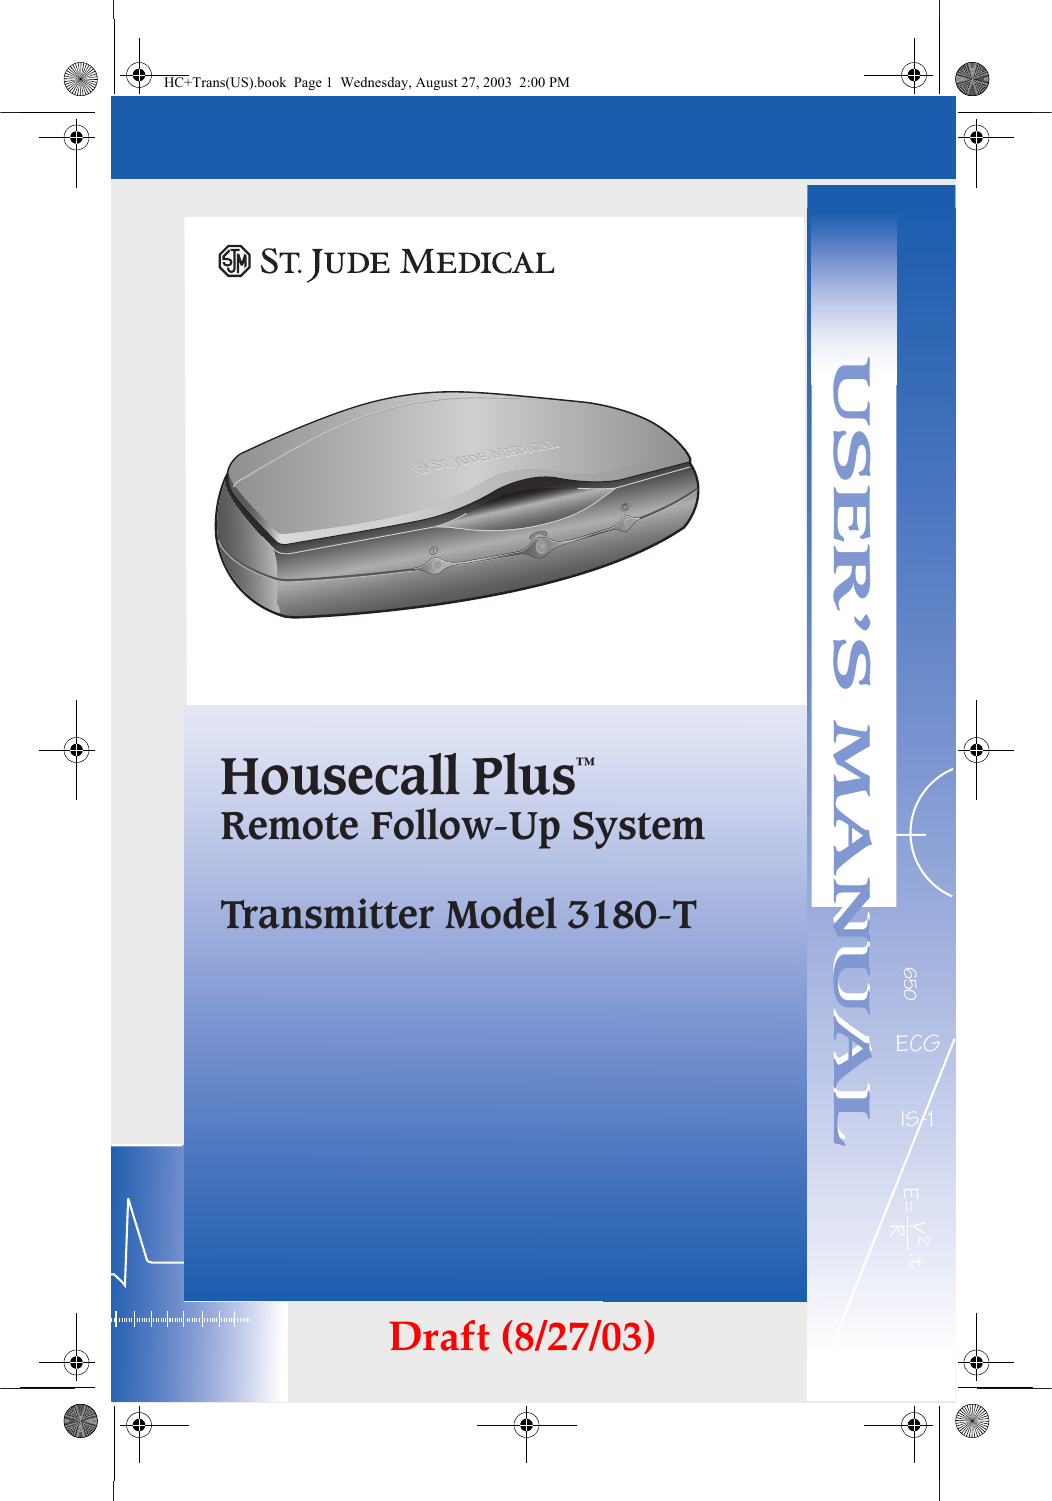 USER&apos;S MANUALECG 650  USER’S MANUALIS-1E= V2R.tHousecall  Plus™ Remote Follow-Up SystemTransmitter Model 3180-THC+Trans(US).book  Page 1  Wednesday, August 27, 2003  2:00 PMDraft (8/27/03)